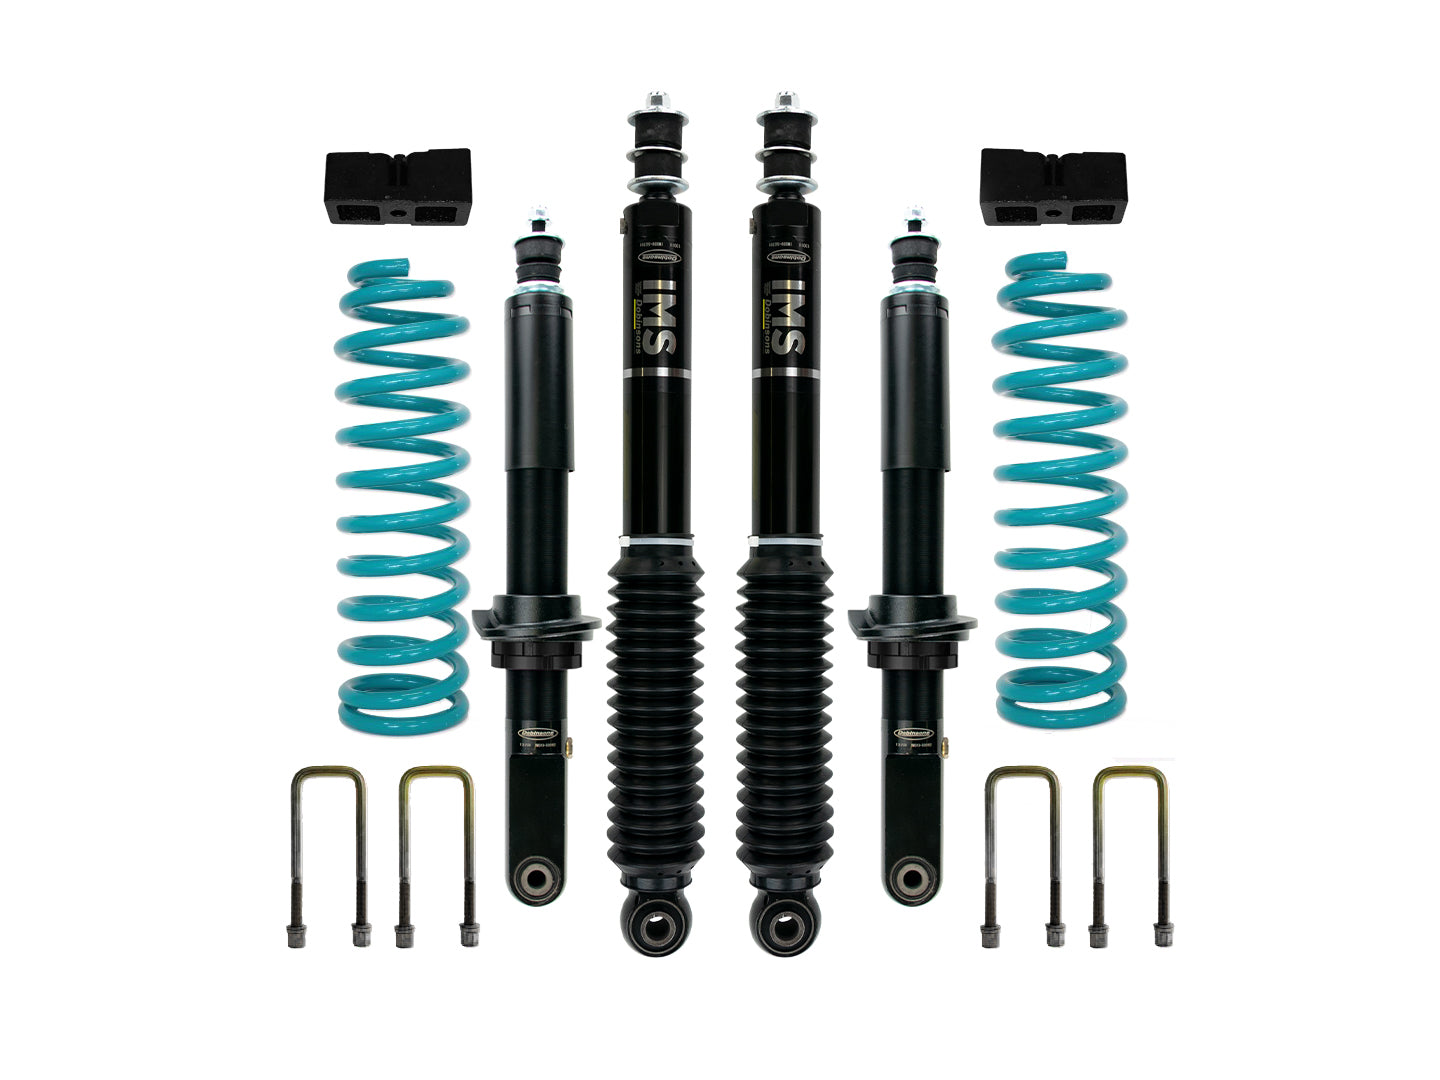 Dobinsons 4x4 2.0"-2.5" IMS Suspension Kit for Toyota Tundra 2000-2006 Double Cab 4x4 V8 With Quick Ride Rear